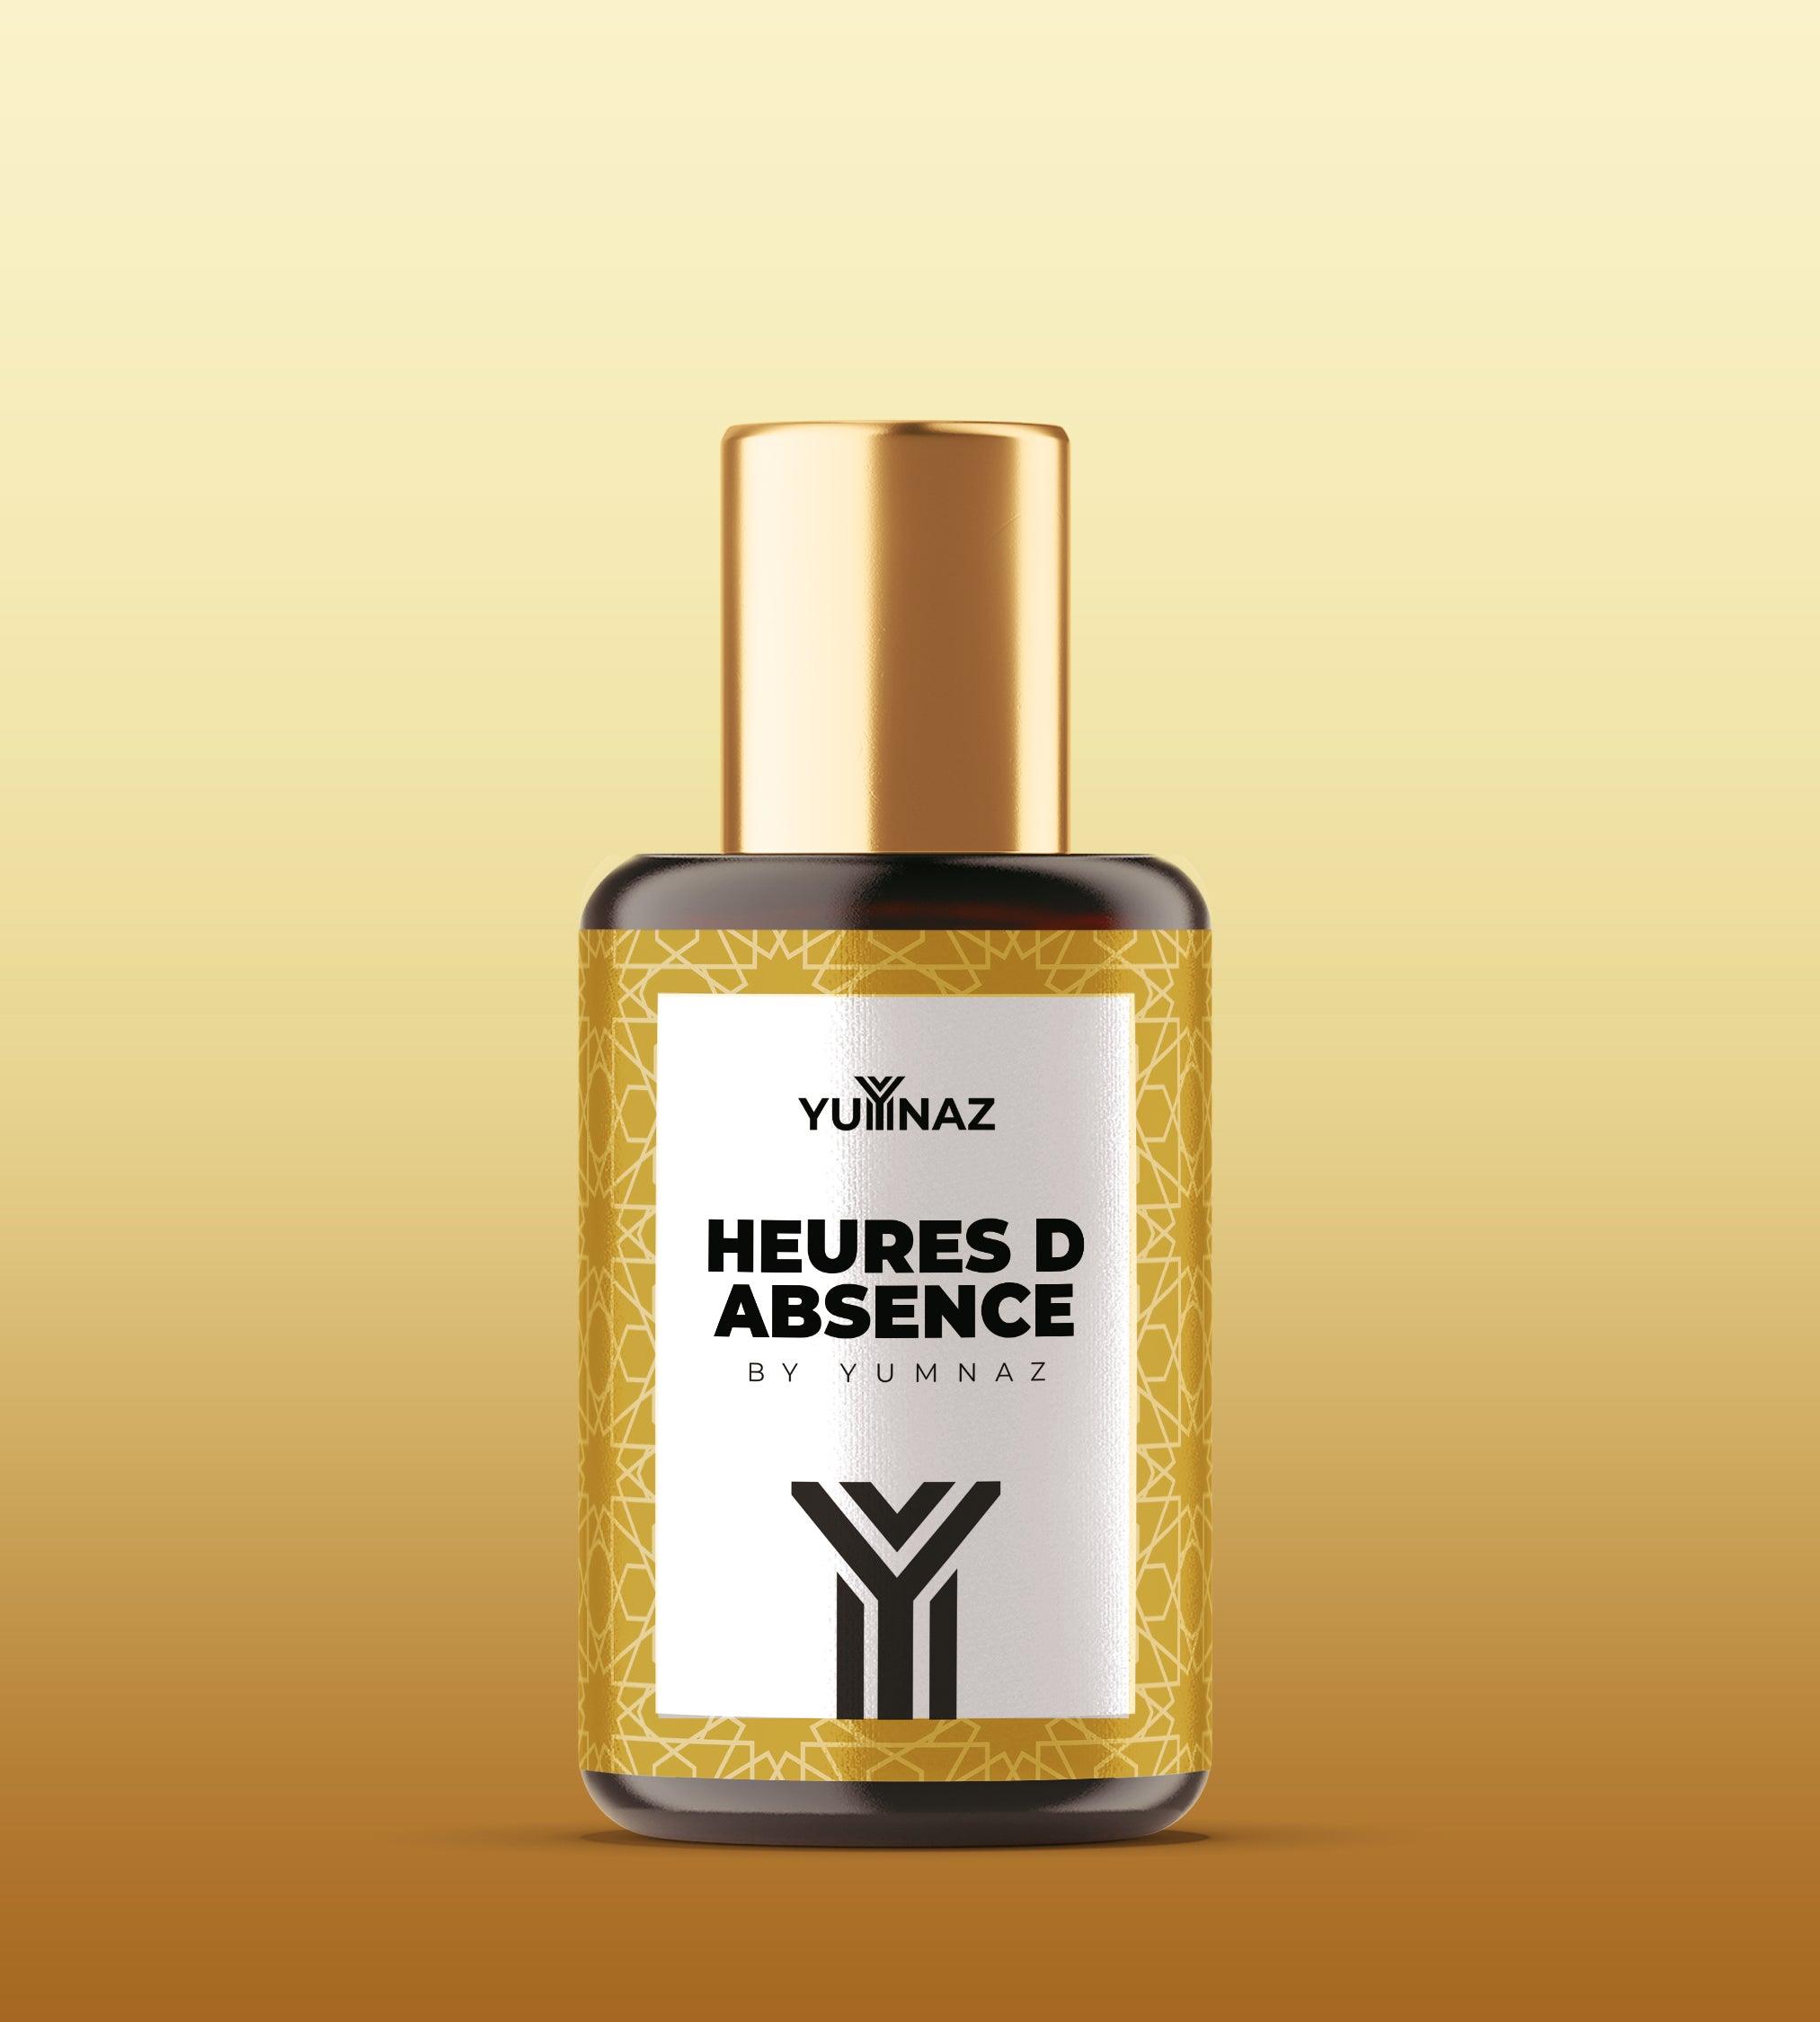 Discover Yumnaz HEURES D ABSENCE: Hours of Absence & Perfume Price in Pakistan